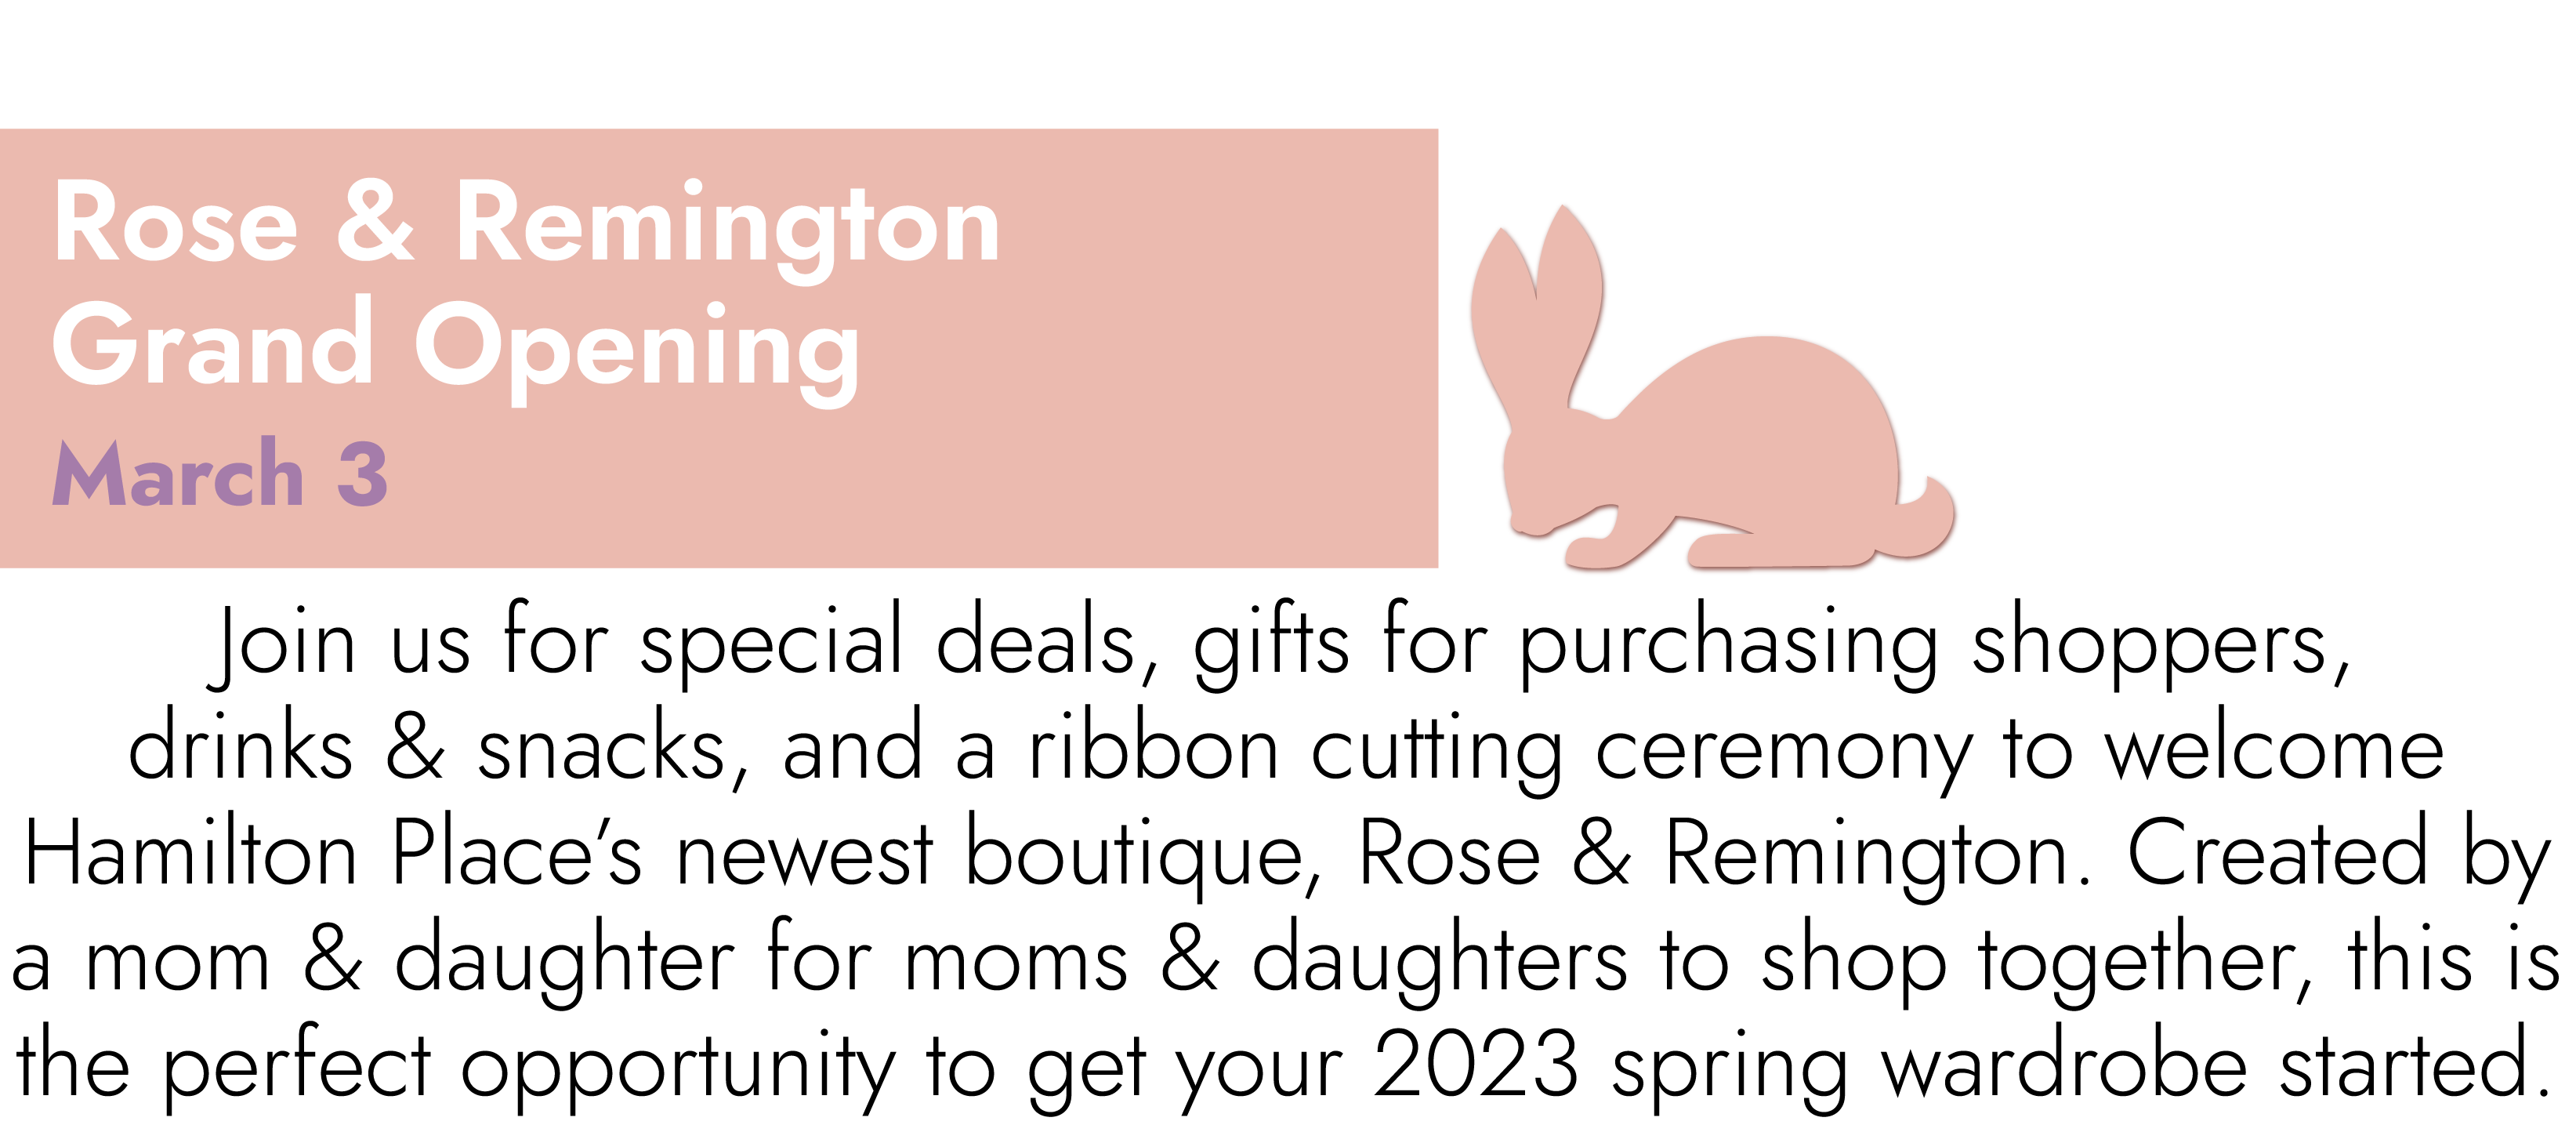 Rose & Remington Grand Opening March 3 Join us for special deals, gifts for purchasing shoppers, drinks & snacks, and a ribbon cutting ceremony to welcome Hamilton Place’s newest boutique, Rose & Remington. Created by a mom & daughter for moms & daughters to shop together, this is the perfect opportunity to get your 2023 spring wardrobe started.